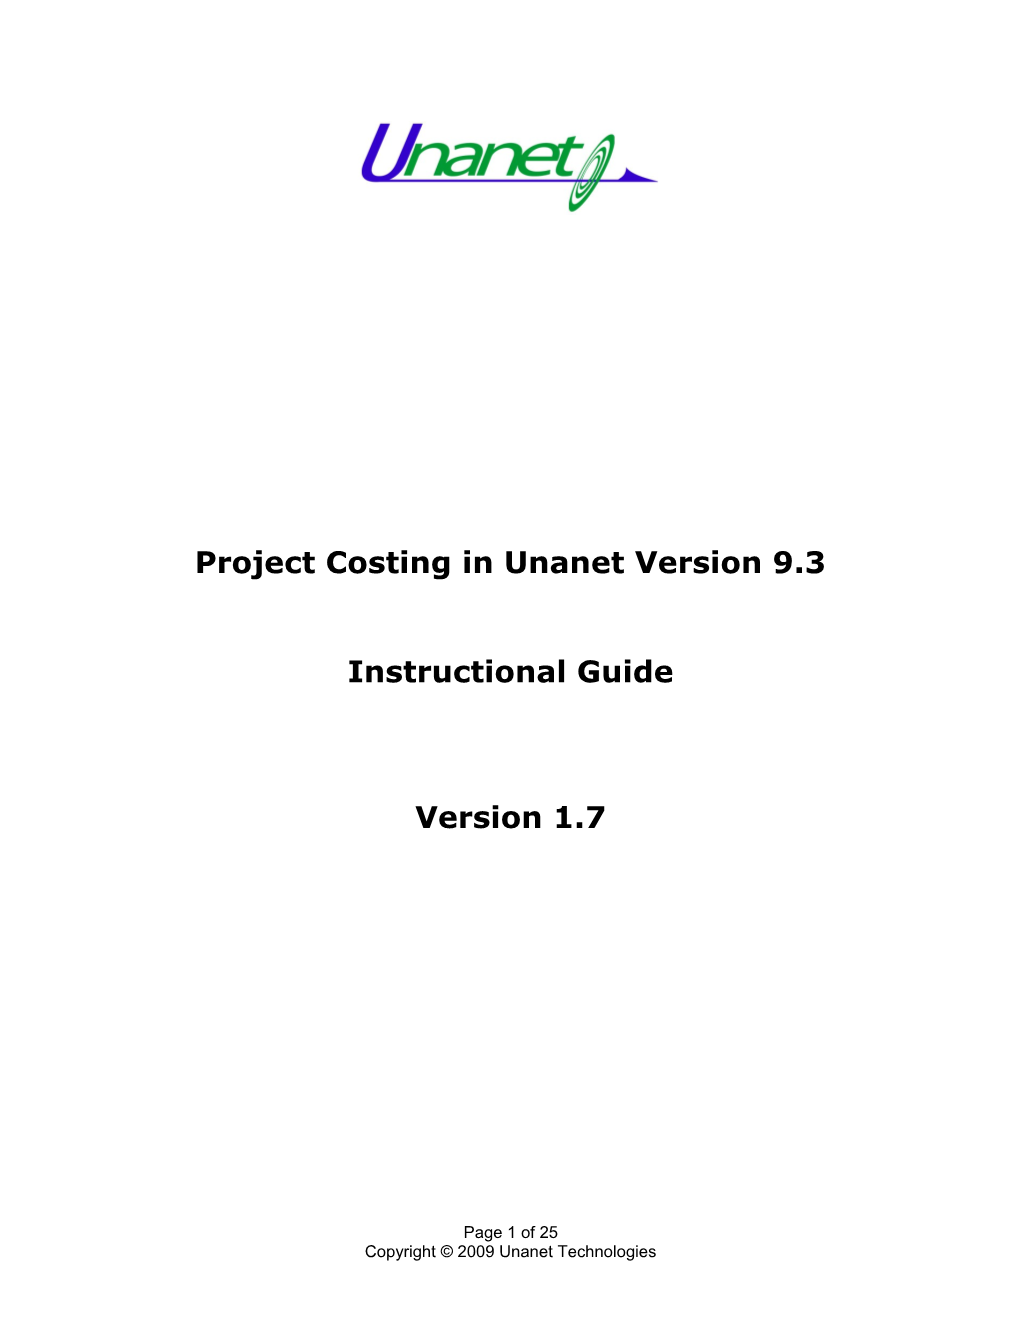 Glossary for Project Costing